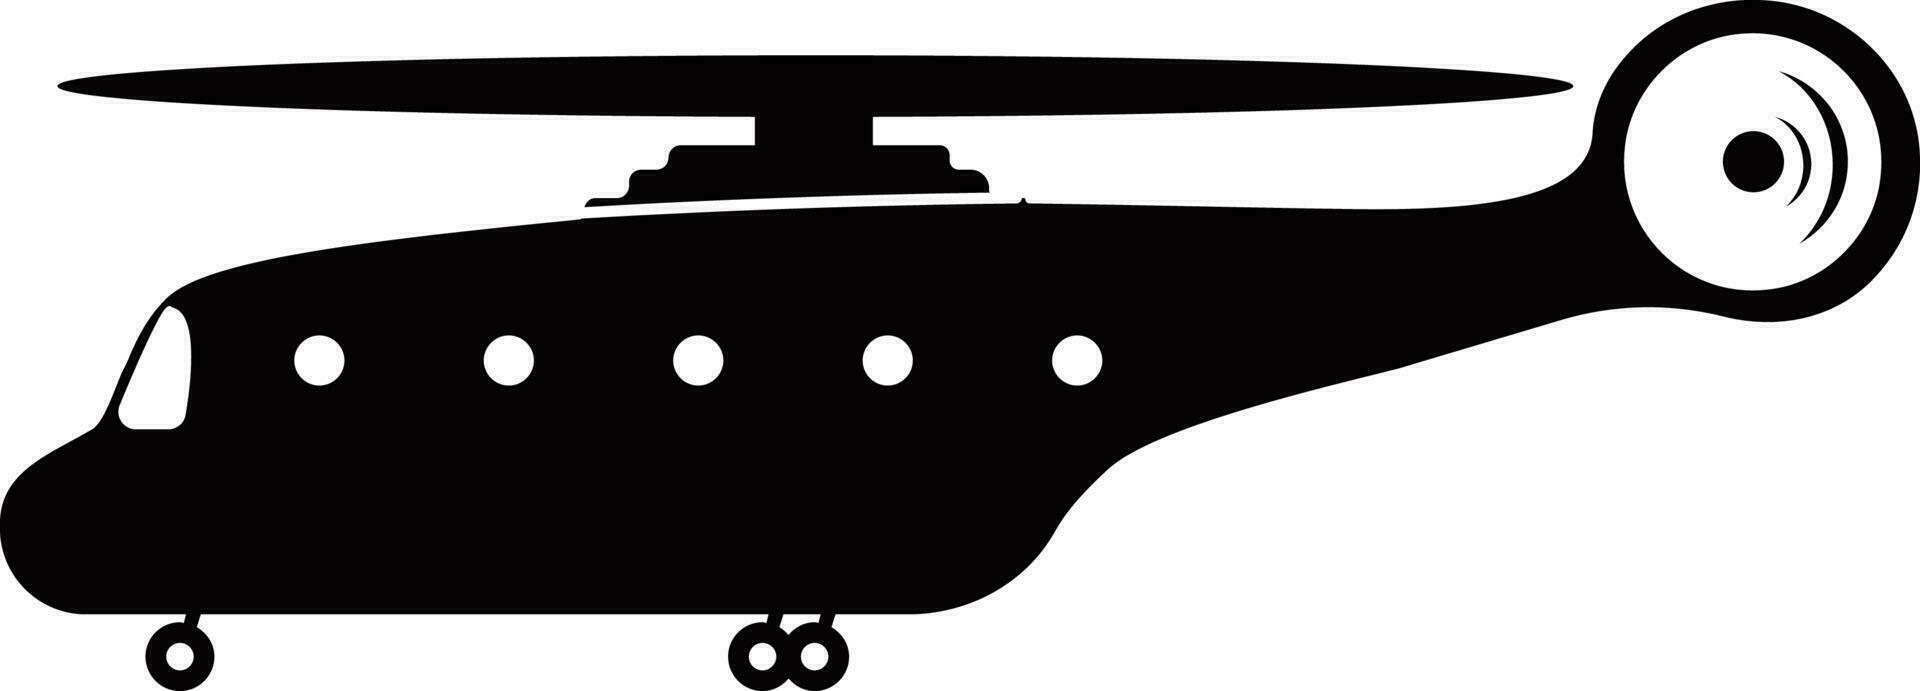 helicopter icon vector illustration